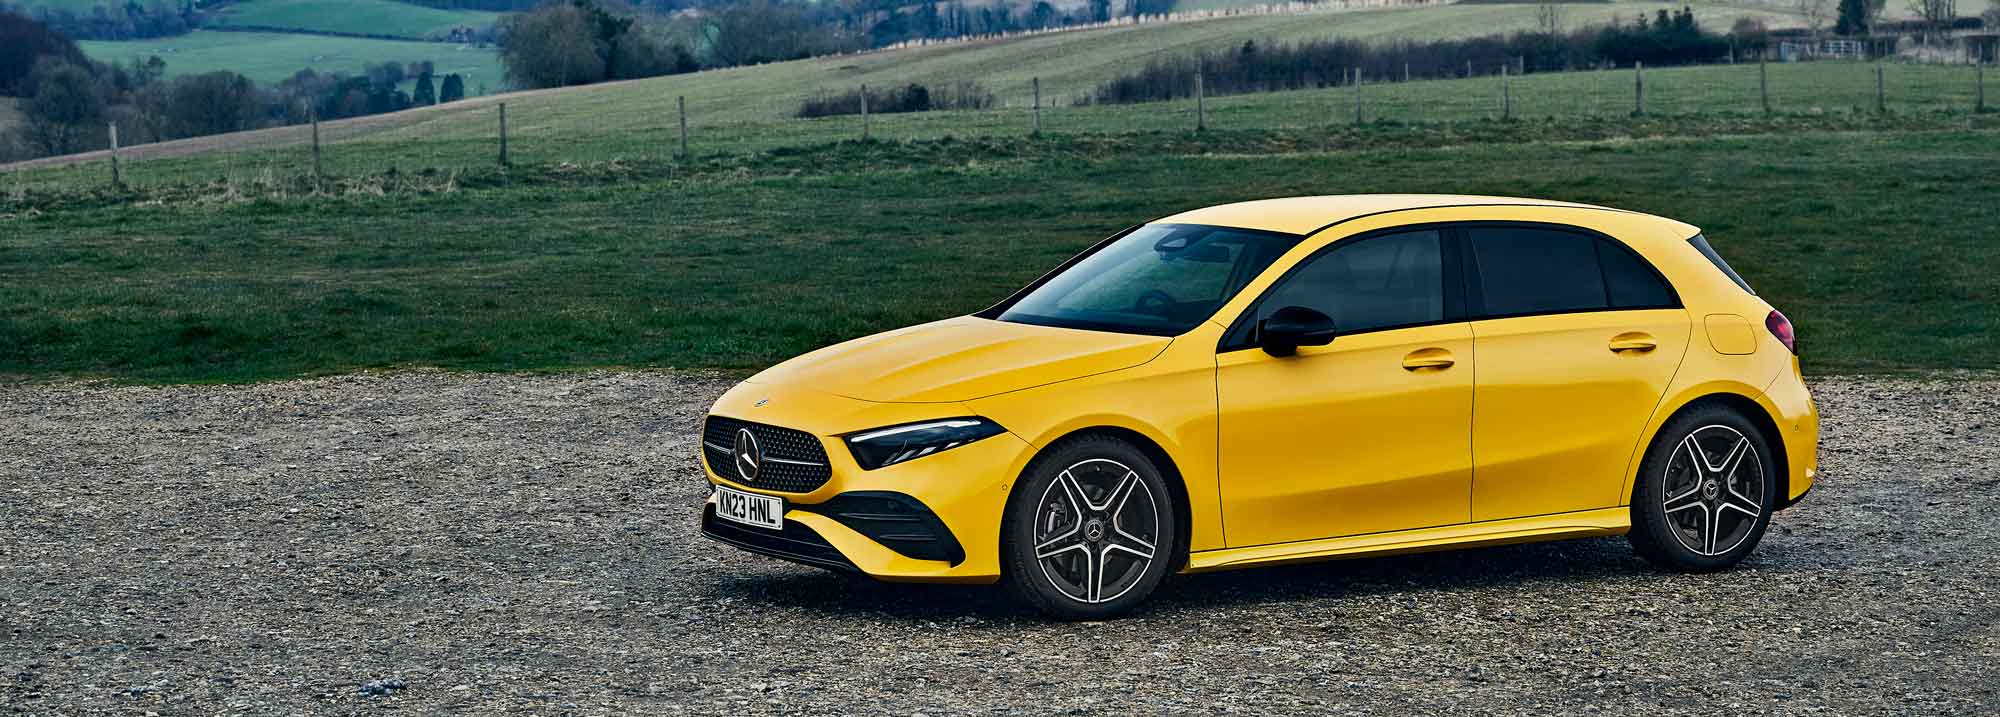 Mercedes-Benz A-Class now available in SA